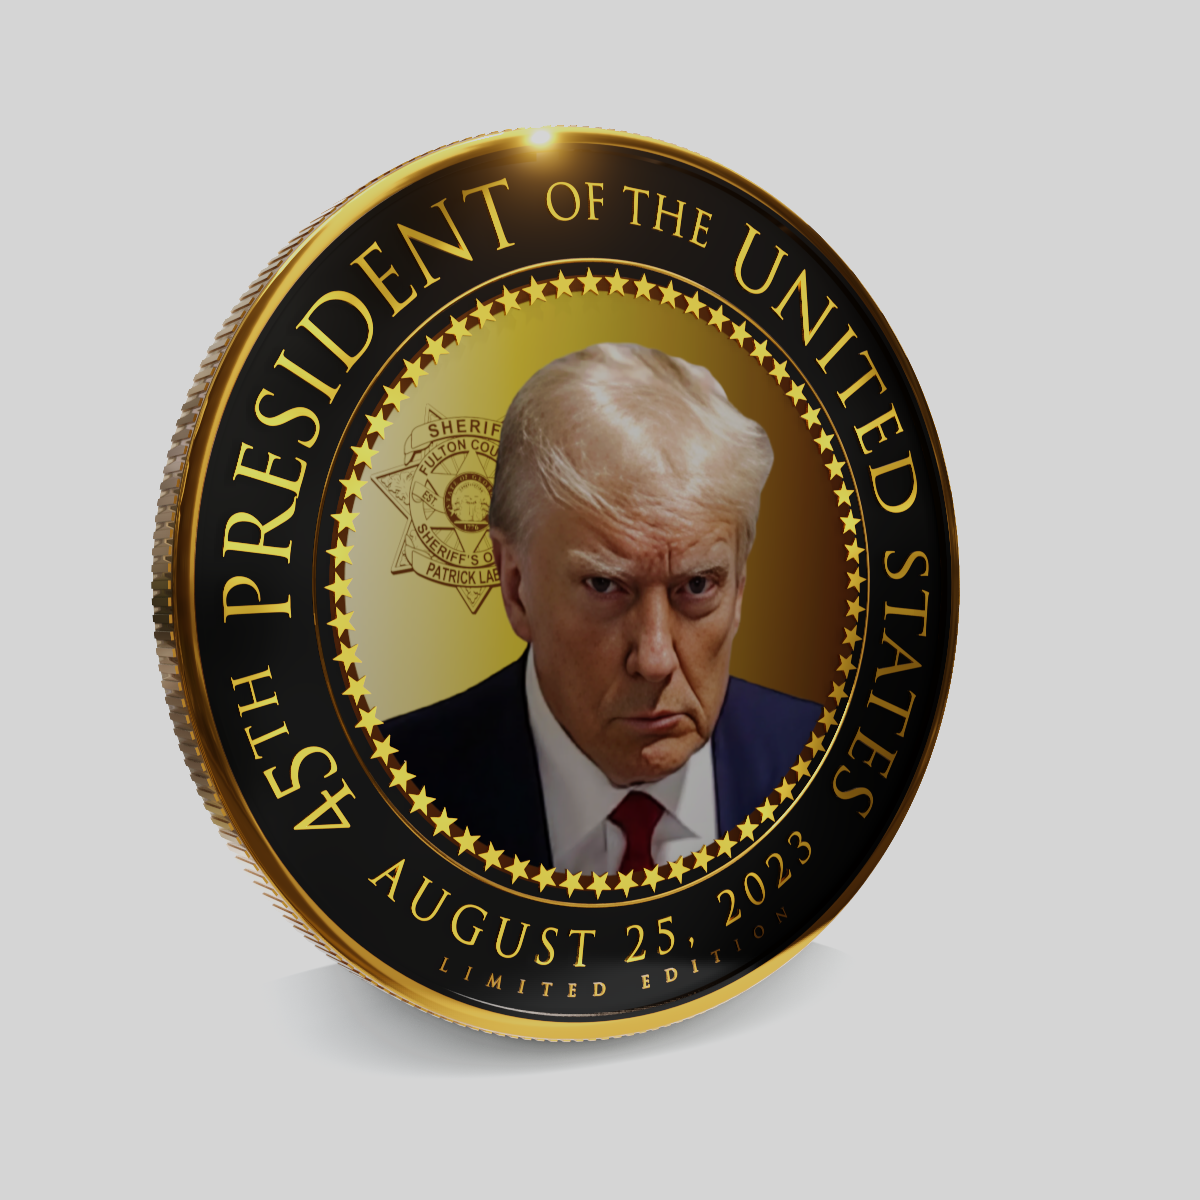 Trump “Get Out of Jail Free” Coin